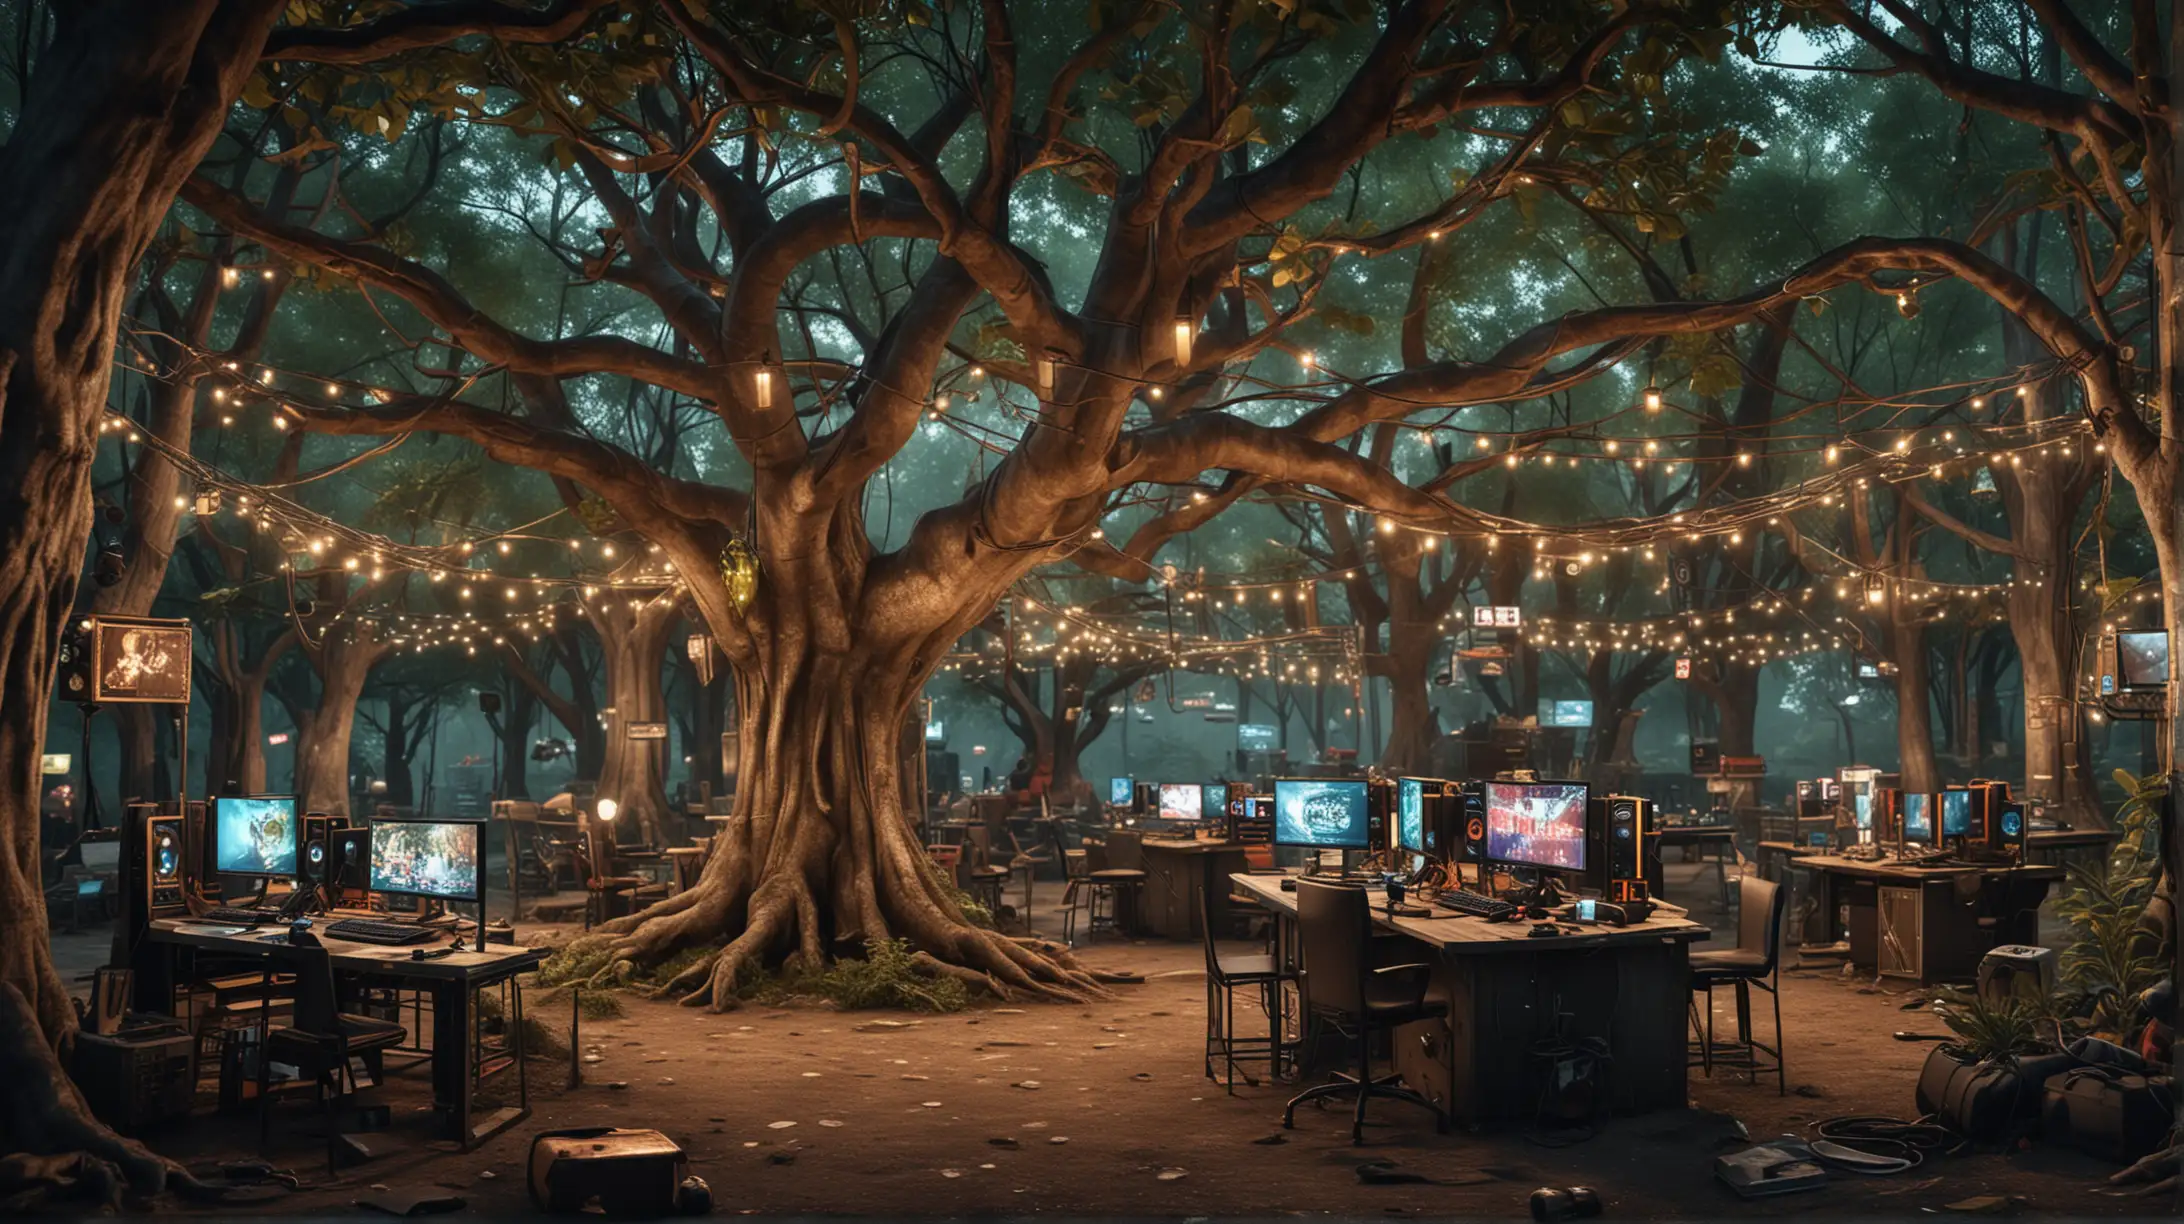 A treed grove of gamers who love to play games and socialize. Technology themed. Gaming themed. Cyber themed. Outdoors with metal and lights